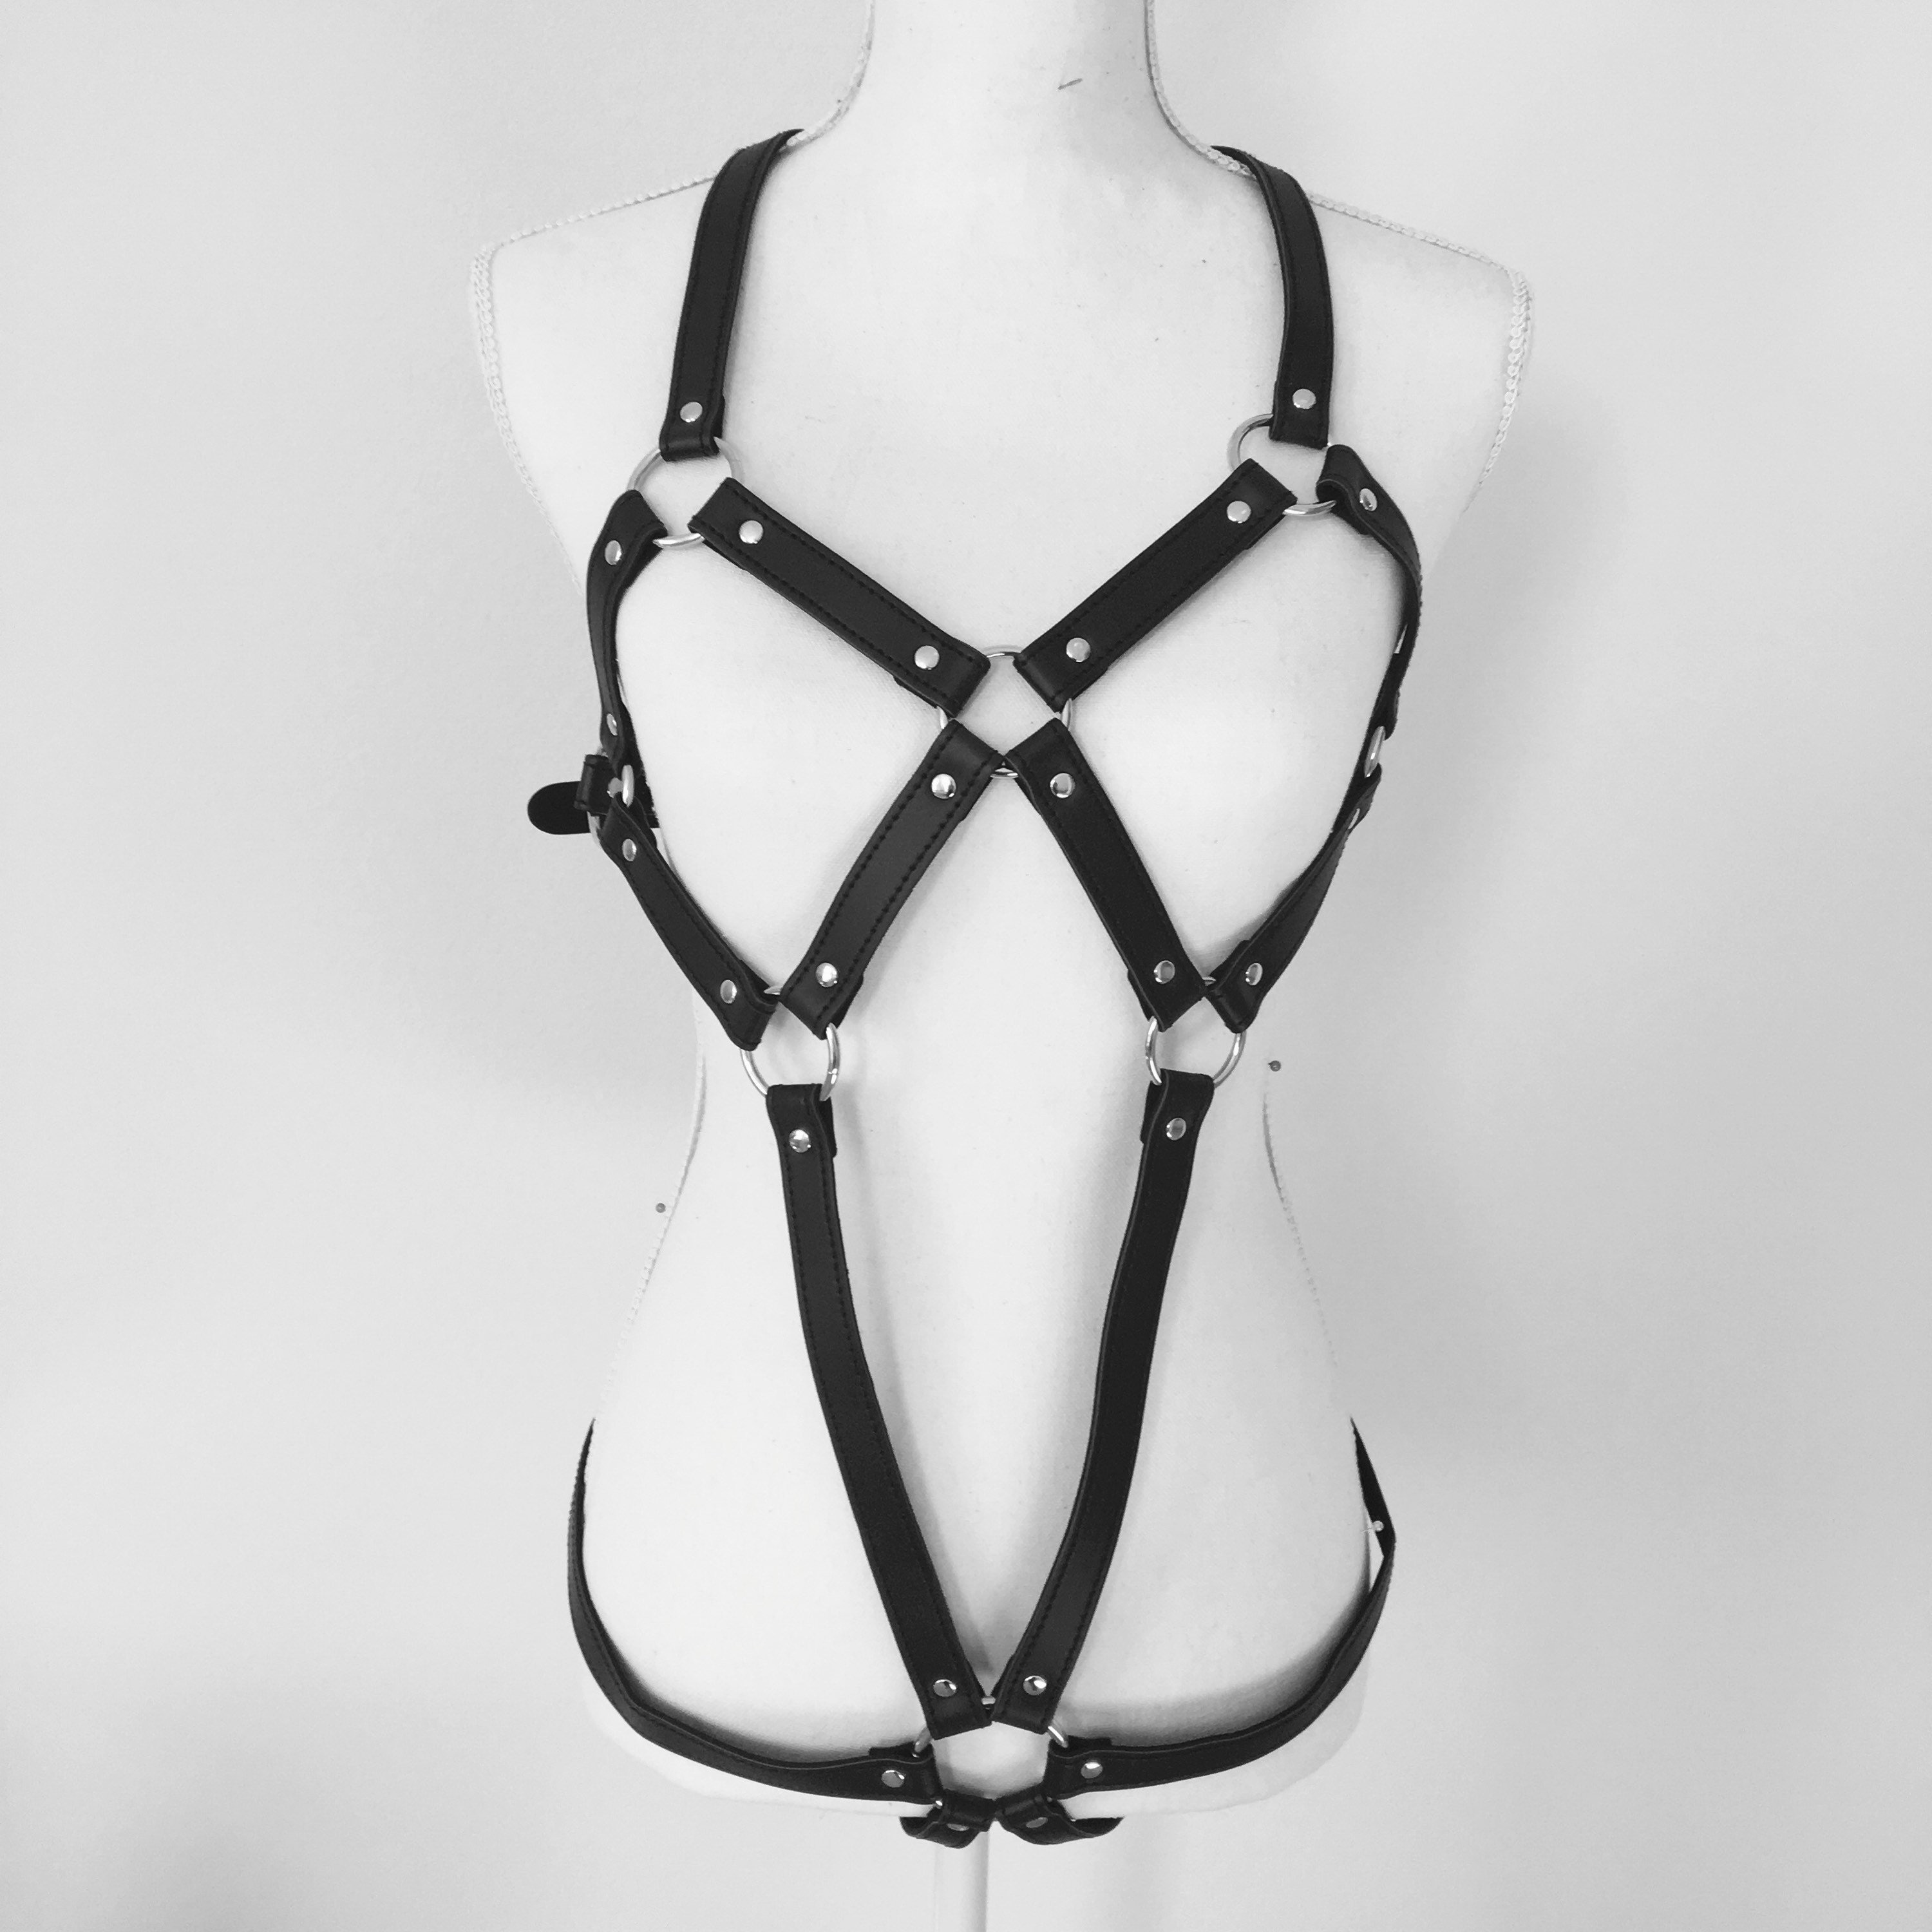 Mature-full Body Harness With Optional Hook/sex Hook BDSM picture